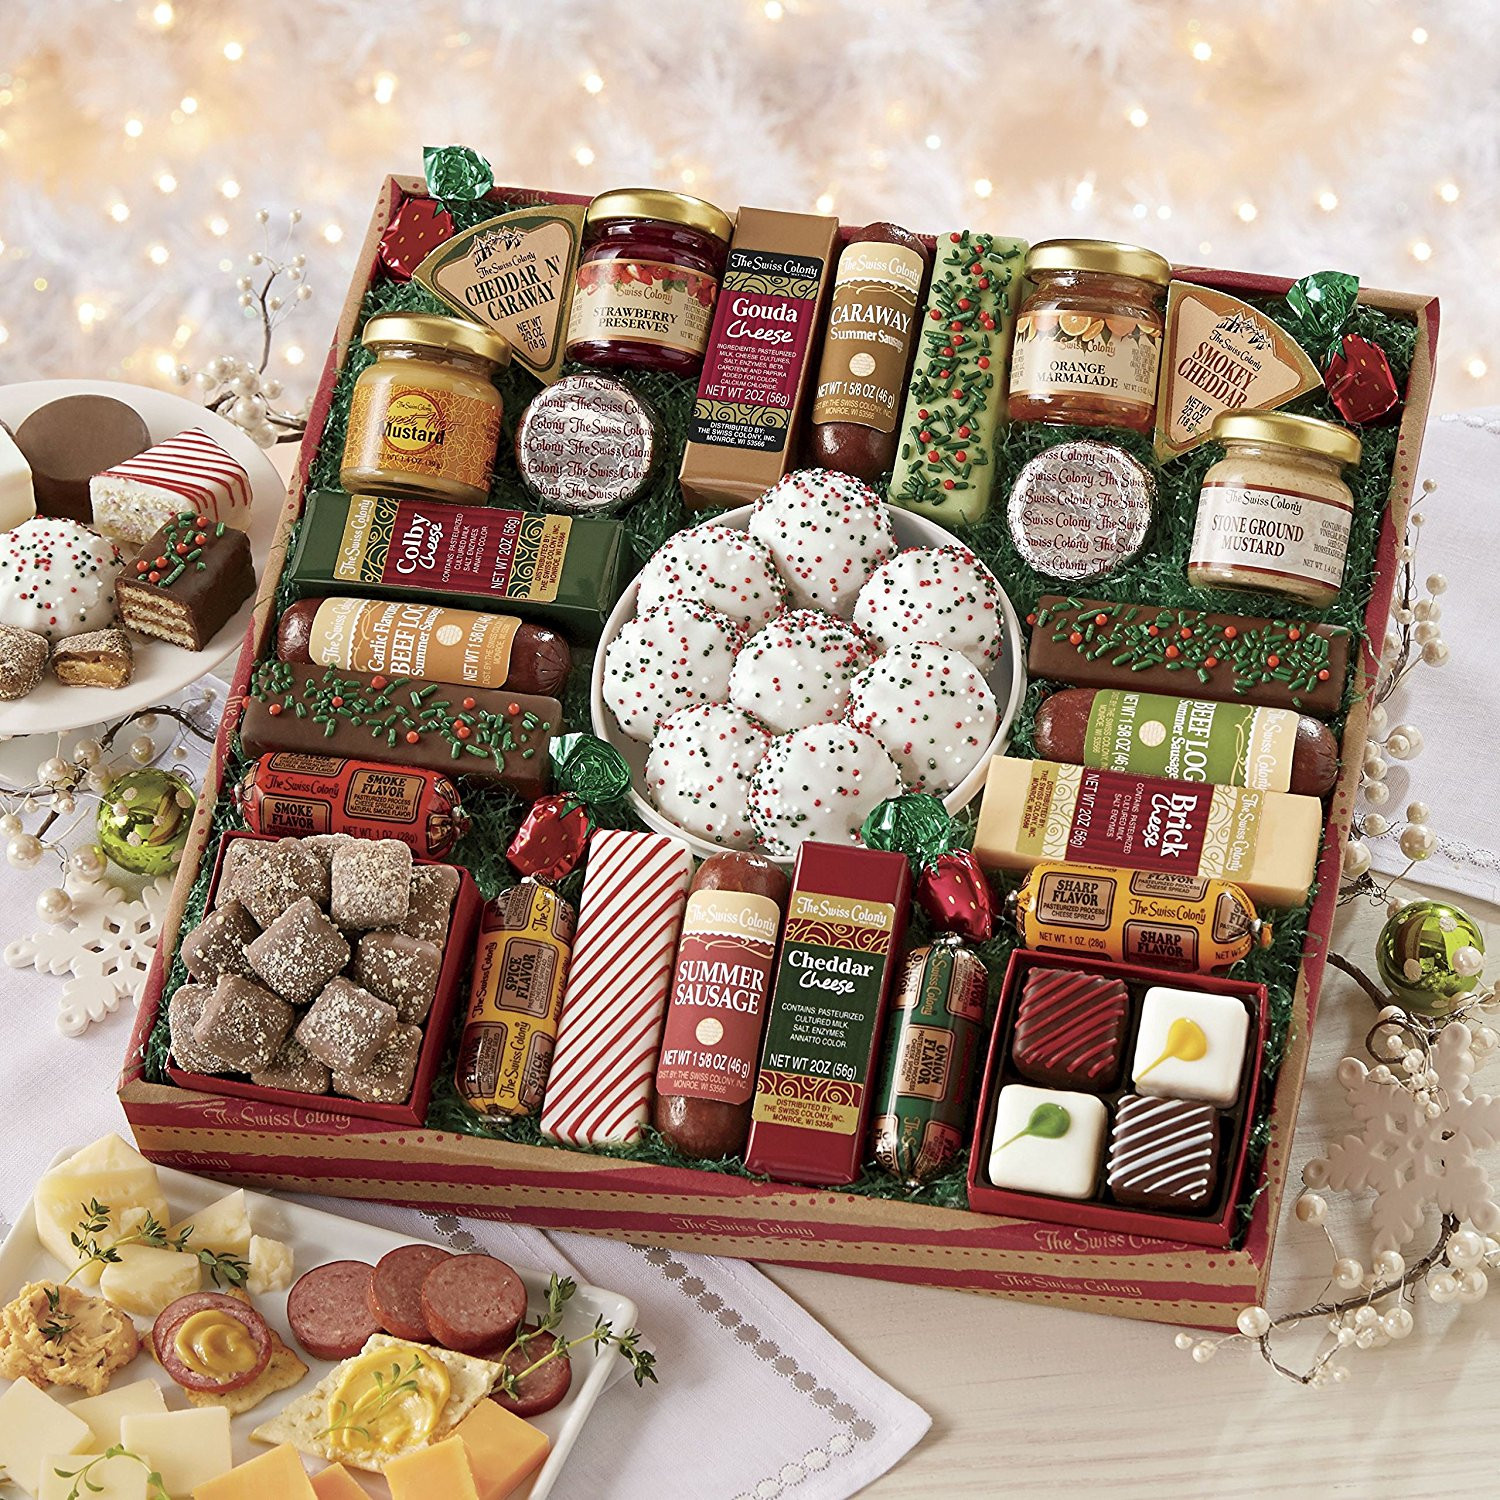 Easy Gourmet Food Gifts Ideas You’ll Love